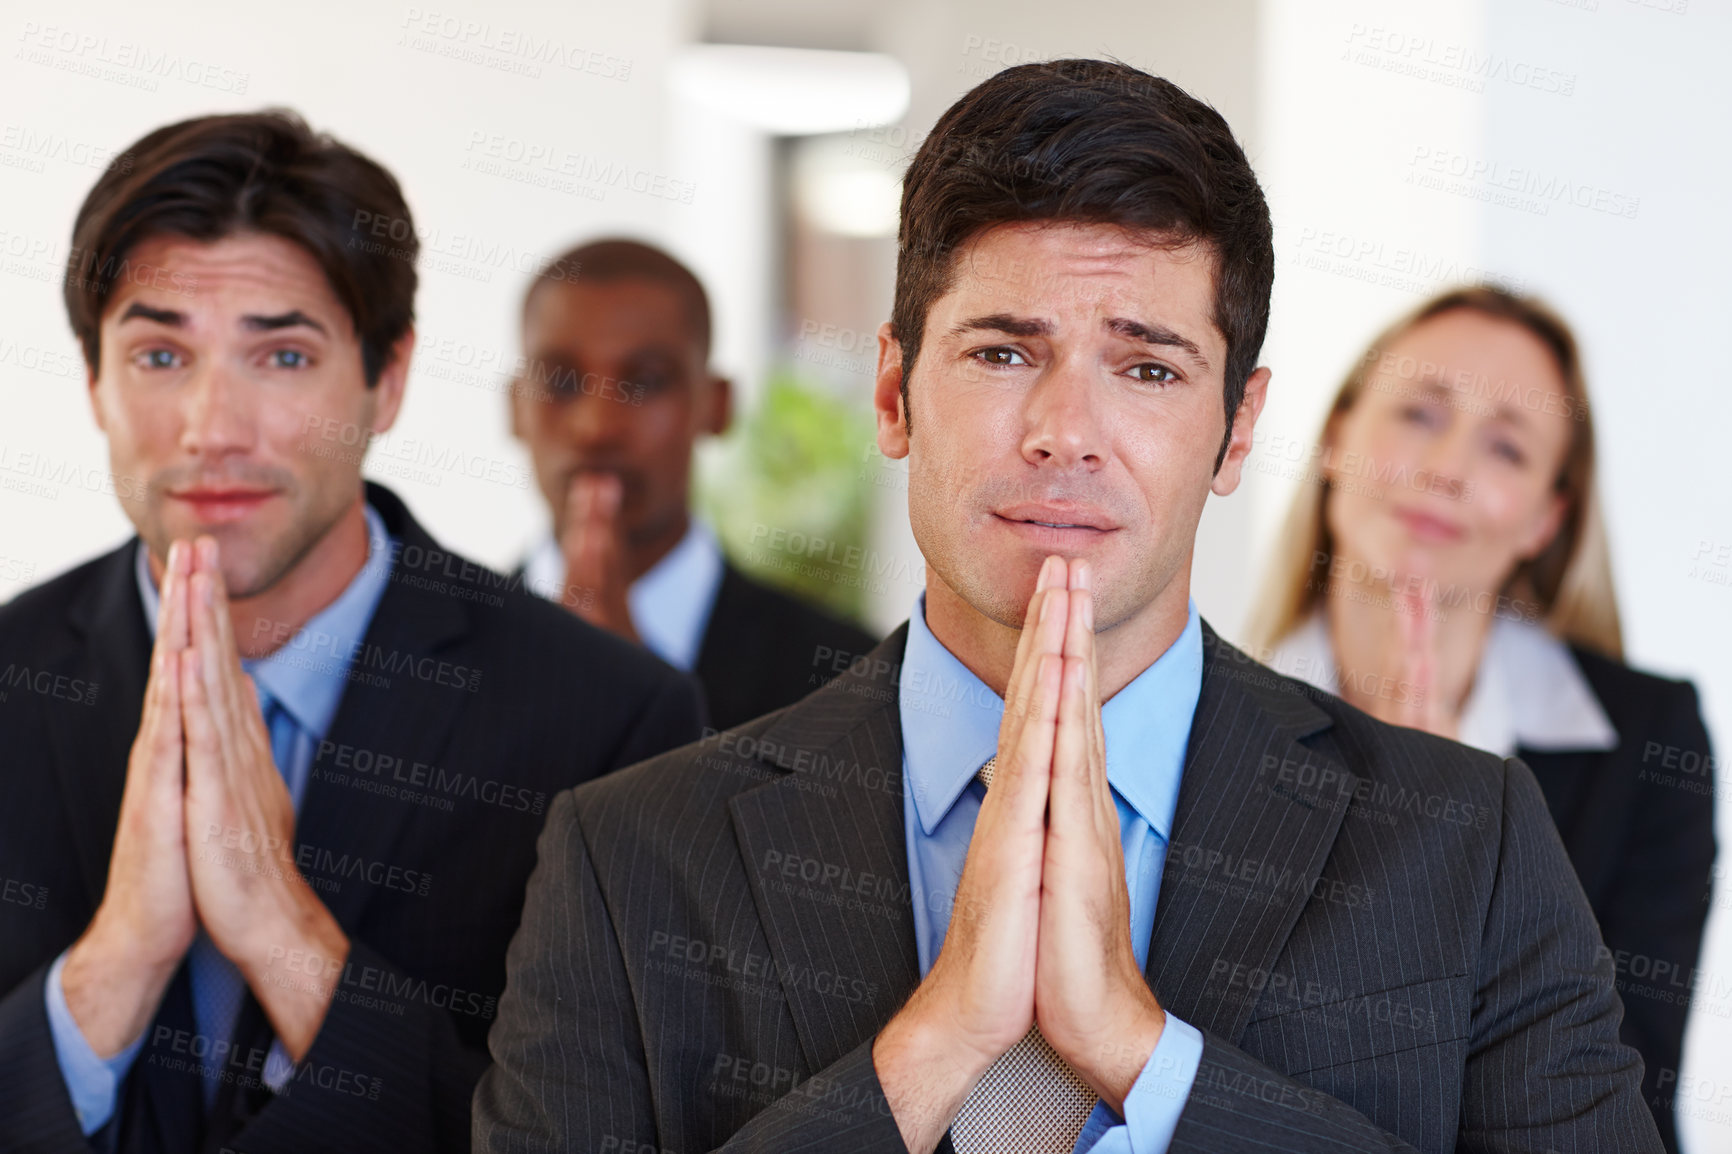 Buy stock photo Business people, praying and team portrait with hope for help in company to finish professional project. Colleague or coworker with hand together for wish, begging or pray for opportunity or support